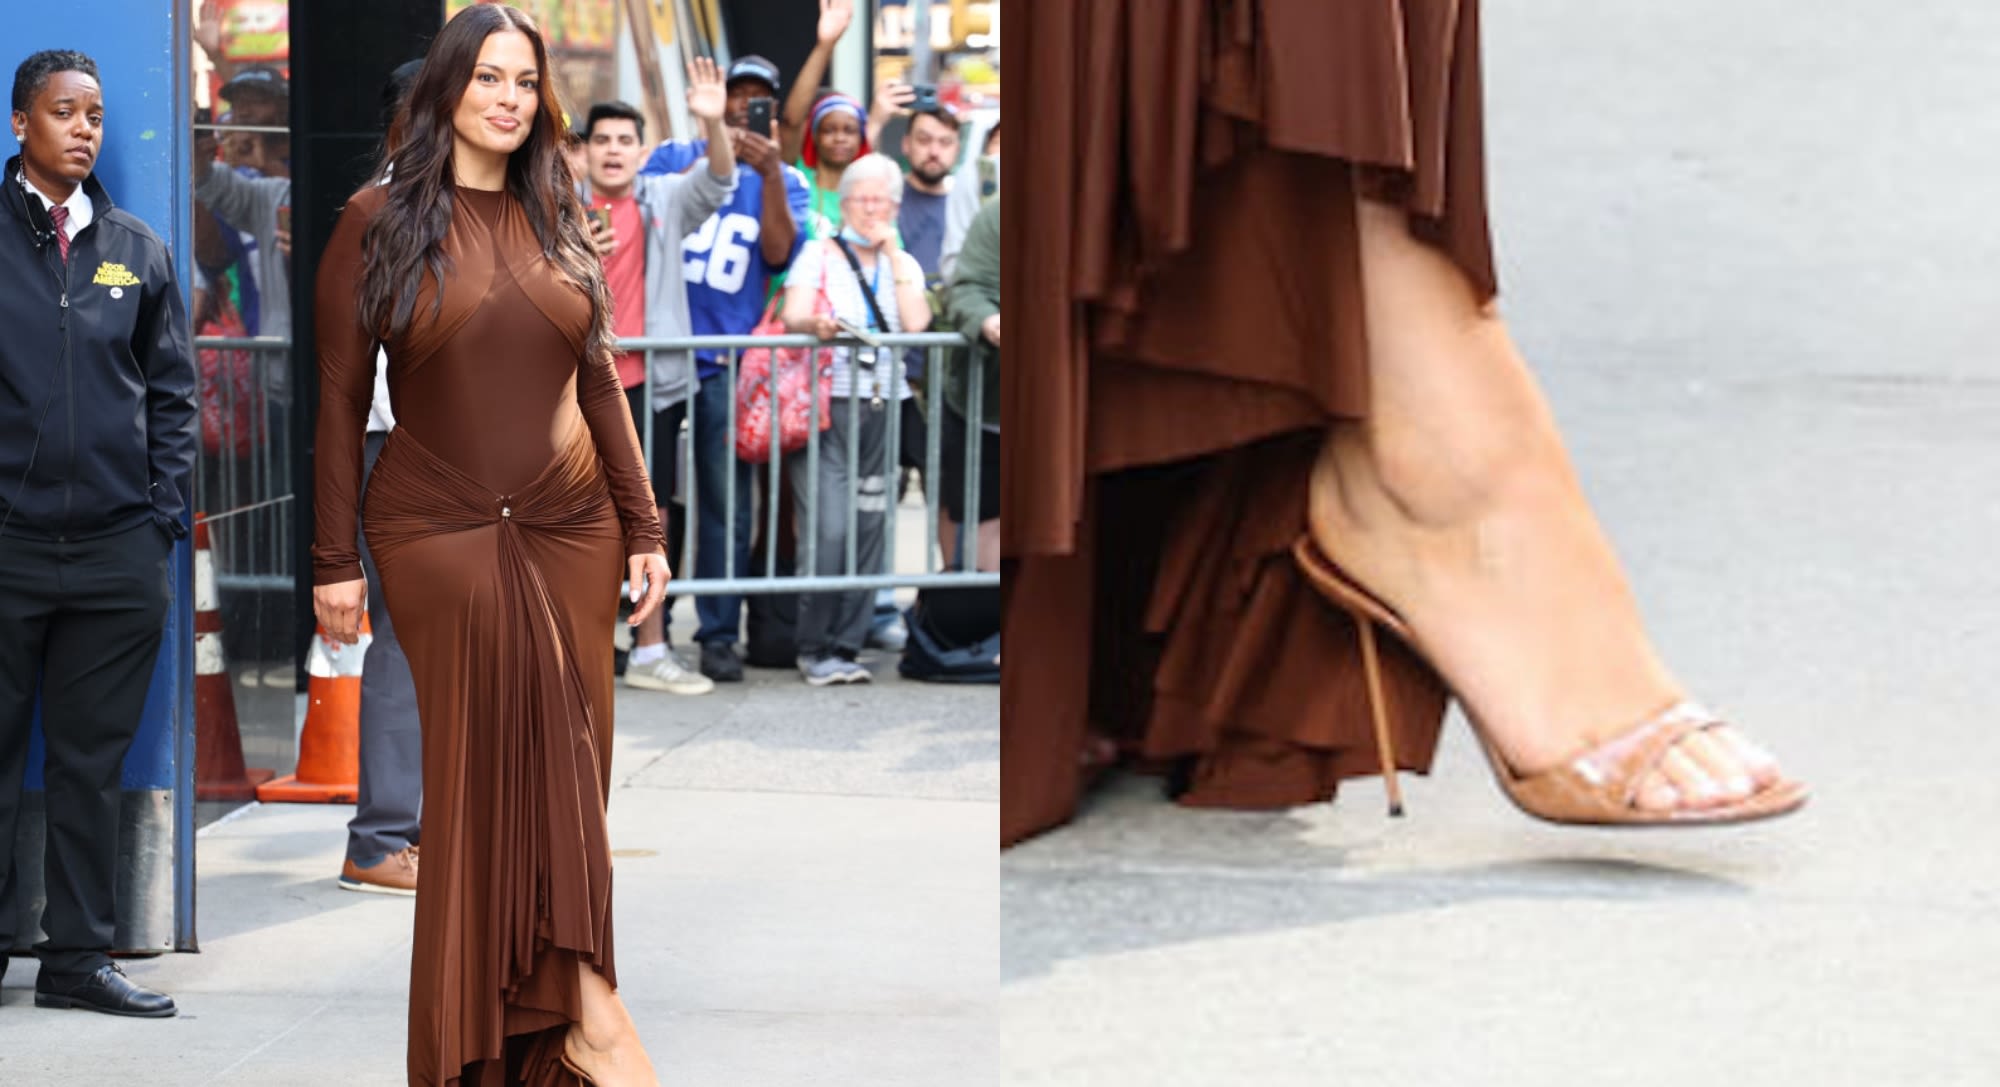 Ashley Graham Slips Into Reptile-Print Heels and Chocolate Brown Wrap Dress for ‘Good Morning America’ Appearance